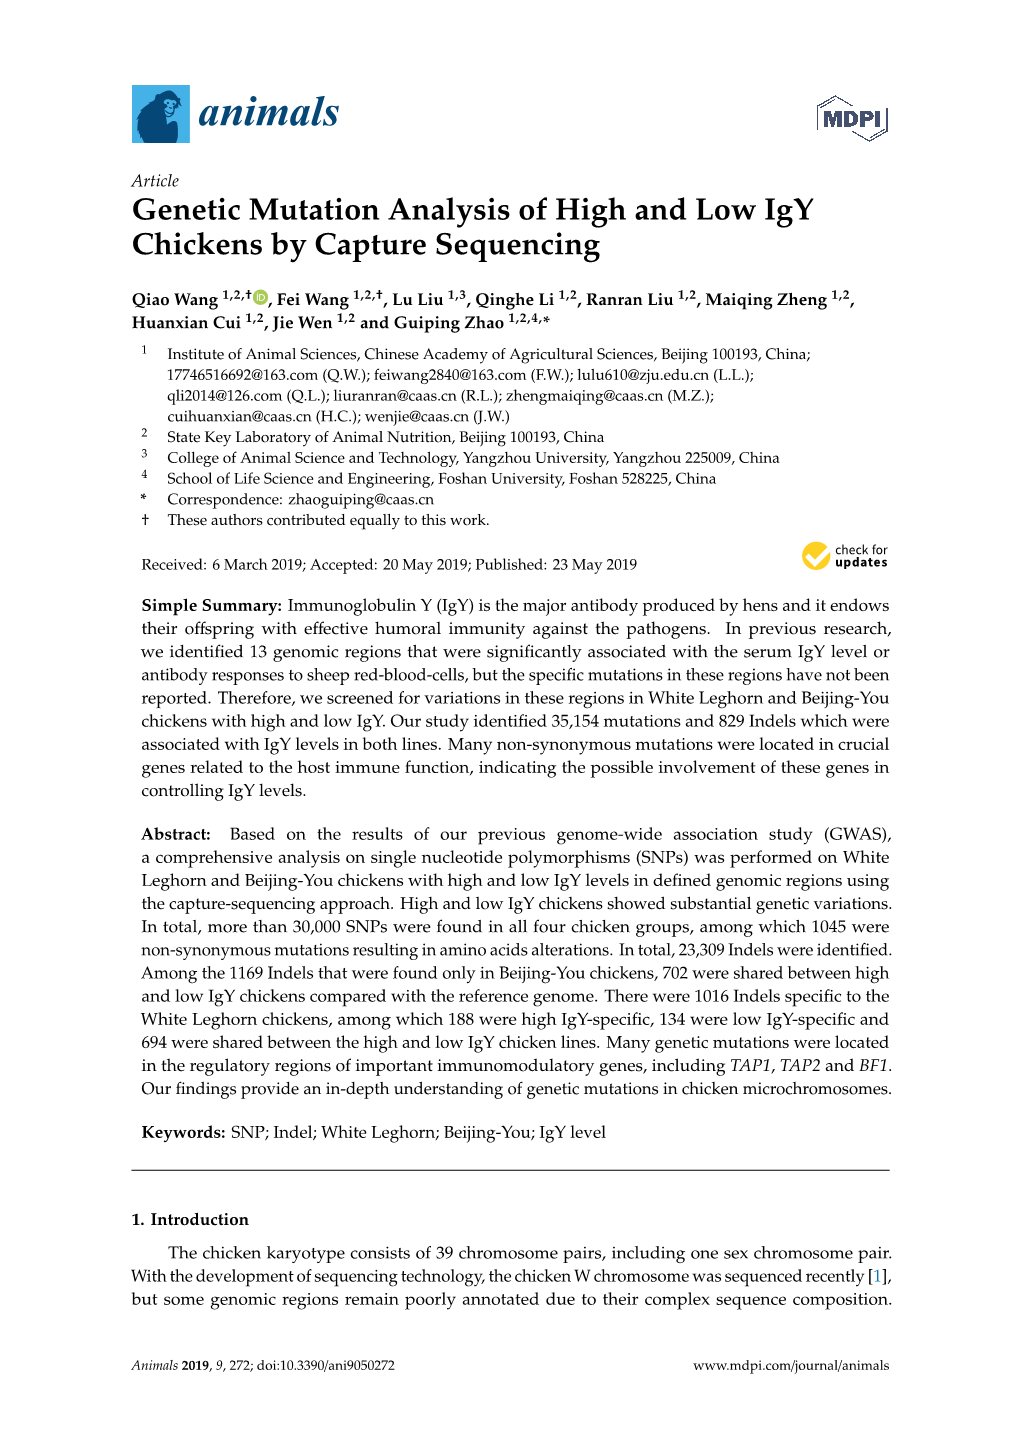 Genetic Mutation Analysis of High and Low Igy Chickens by Capture Sequencing